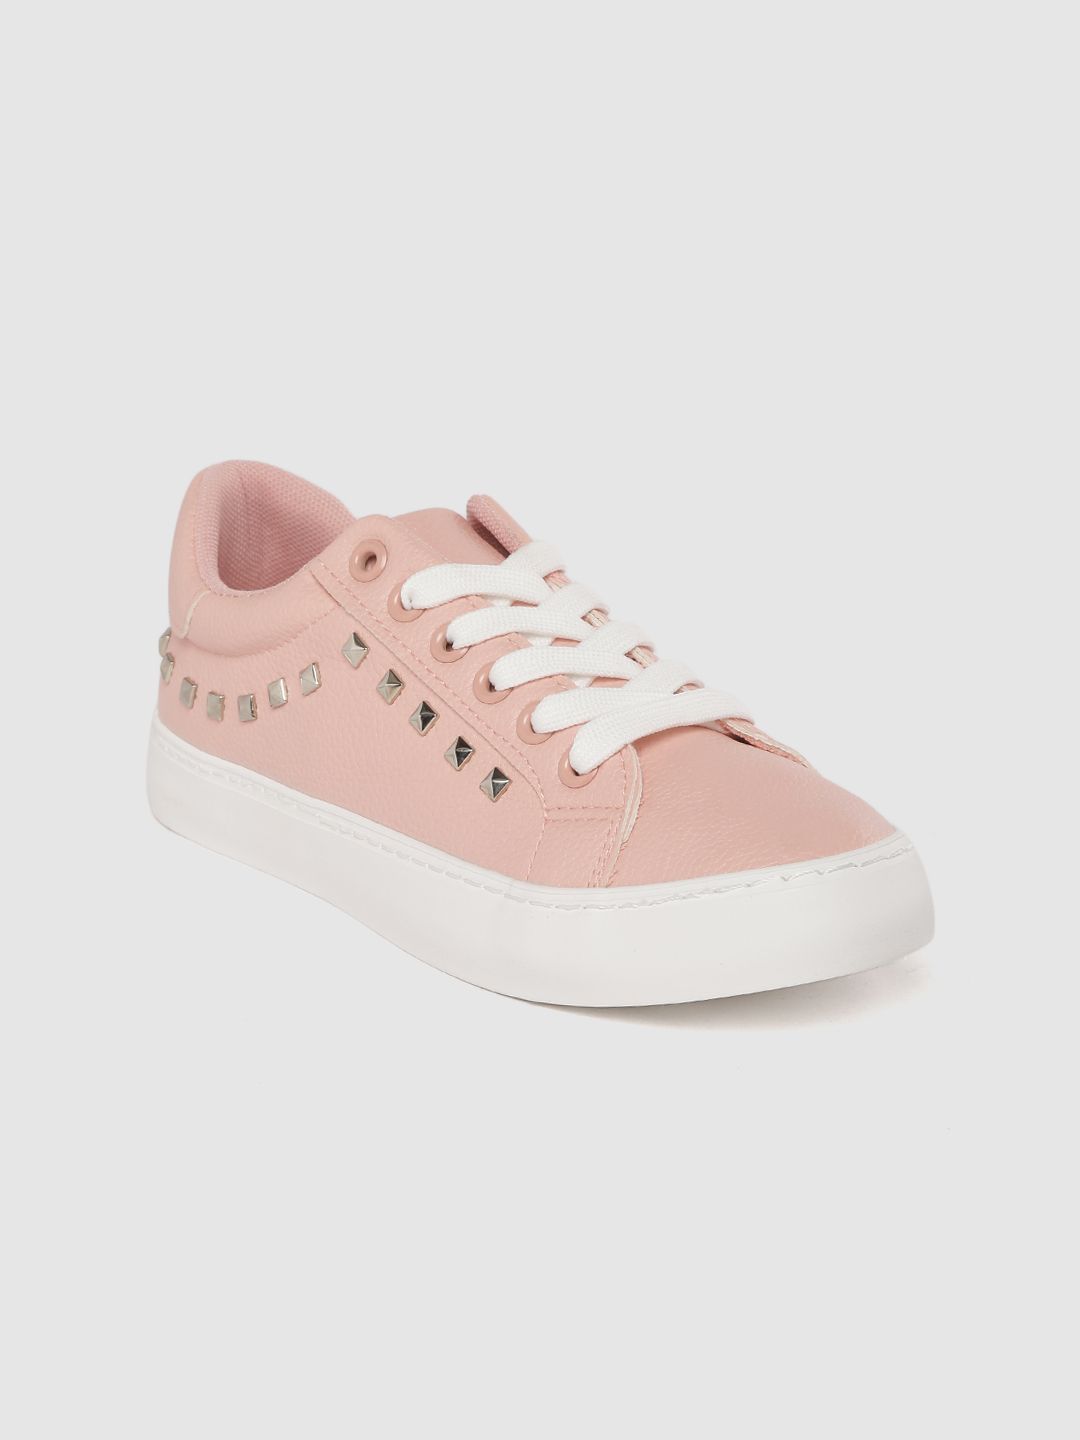 Allen Solly Women Pink Solid Sneakers with Studded Detail Price in India